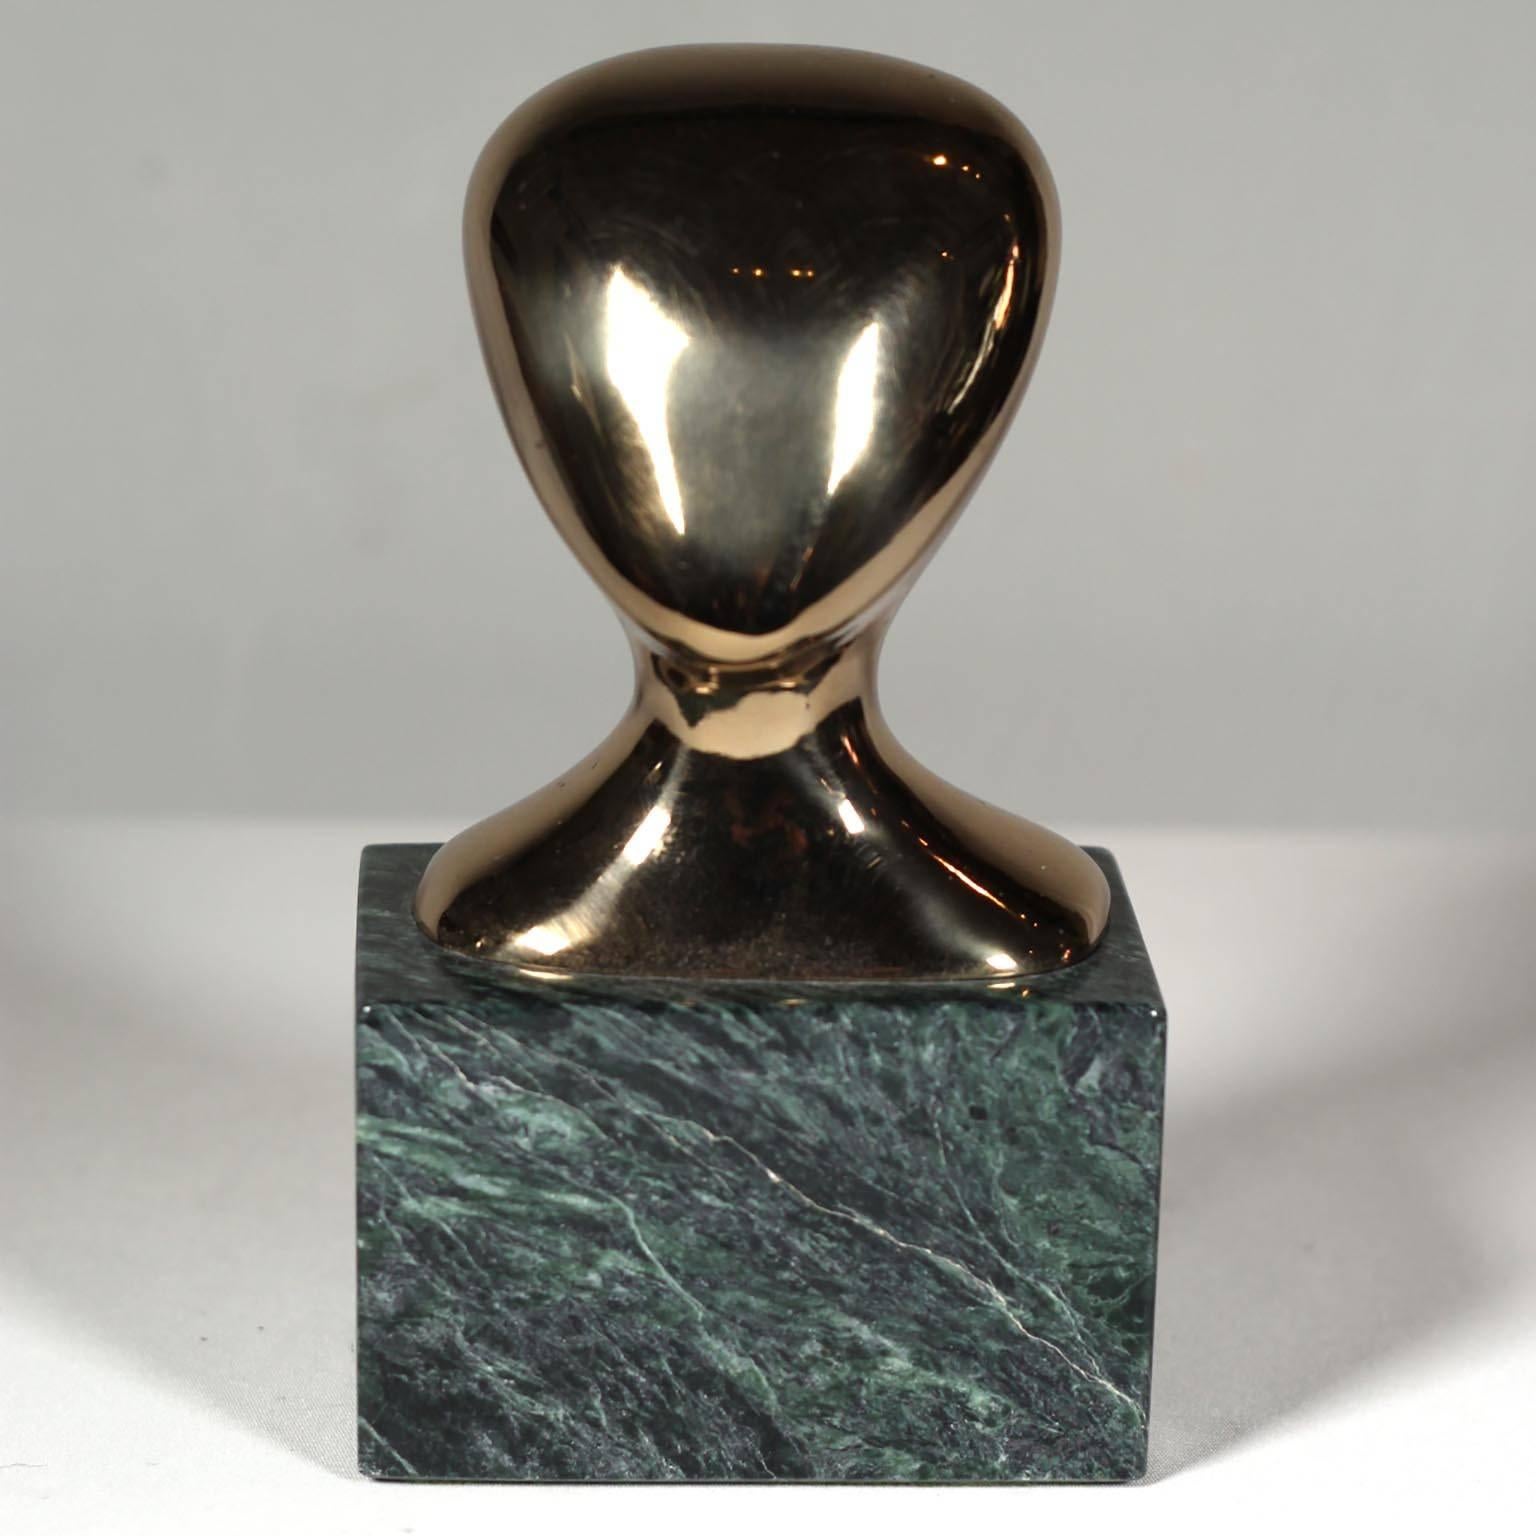 Patinated bronze figure on marble titled, "The Head" by artist Philip Argerson, circa 1970s.
